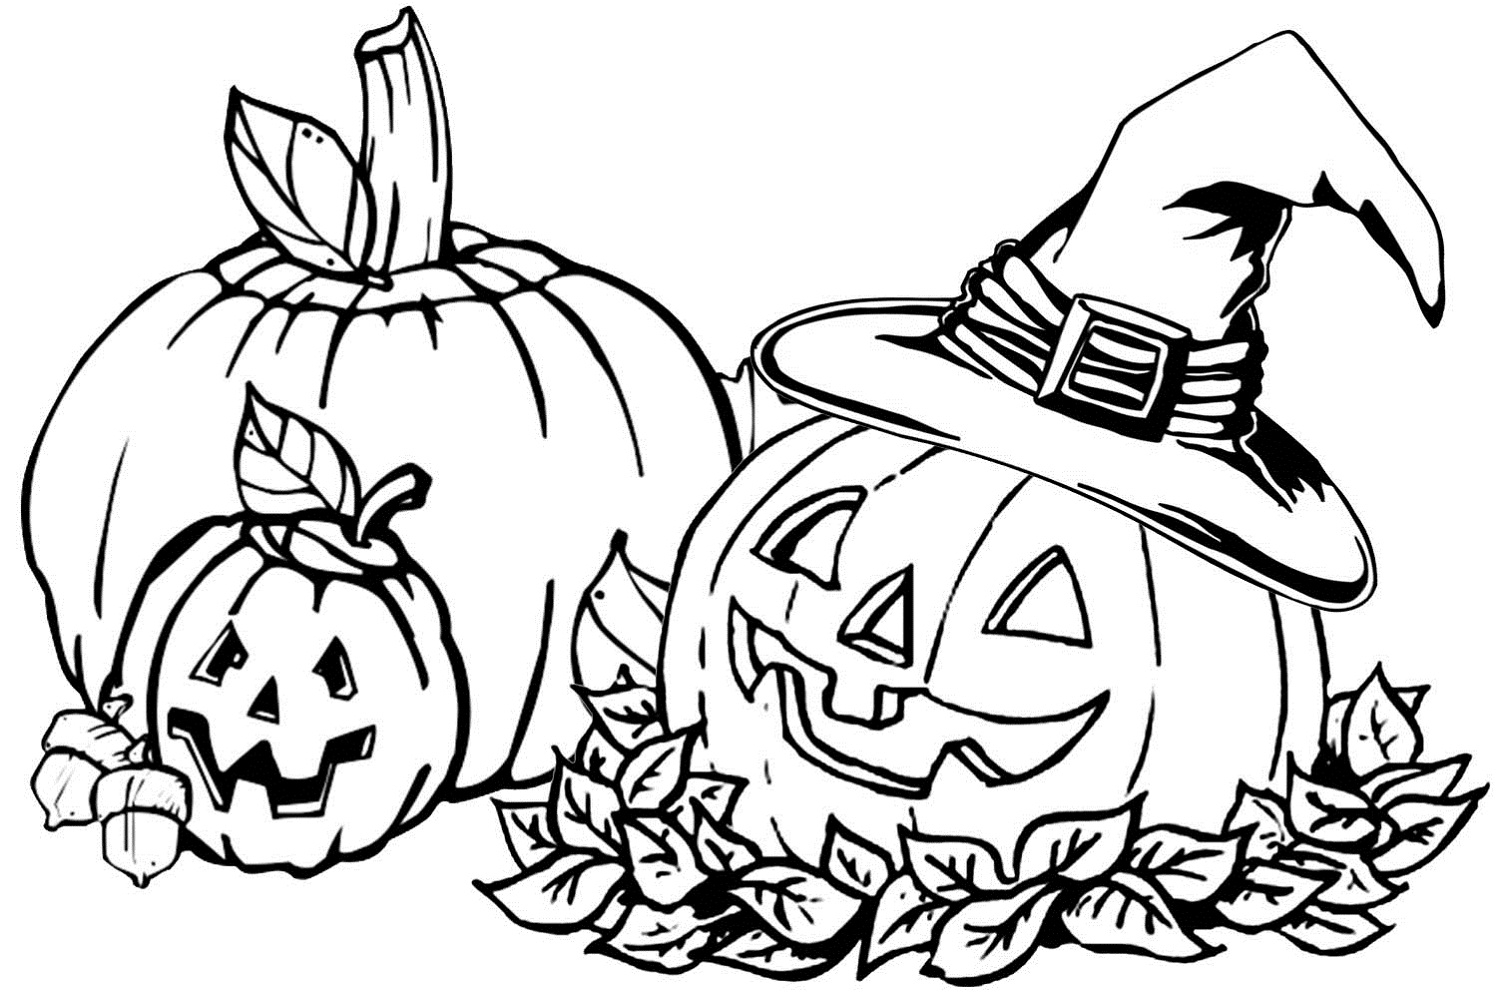 Coloring Pages Autumn Season Coloring Ideas Staggering Free Fall Coloring Sheets Ideas Pages